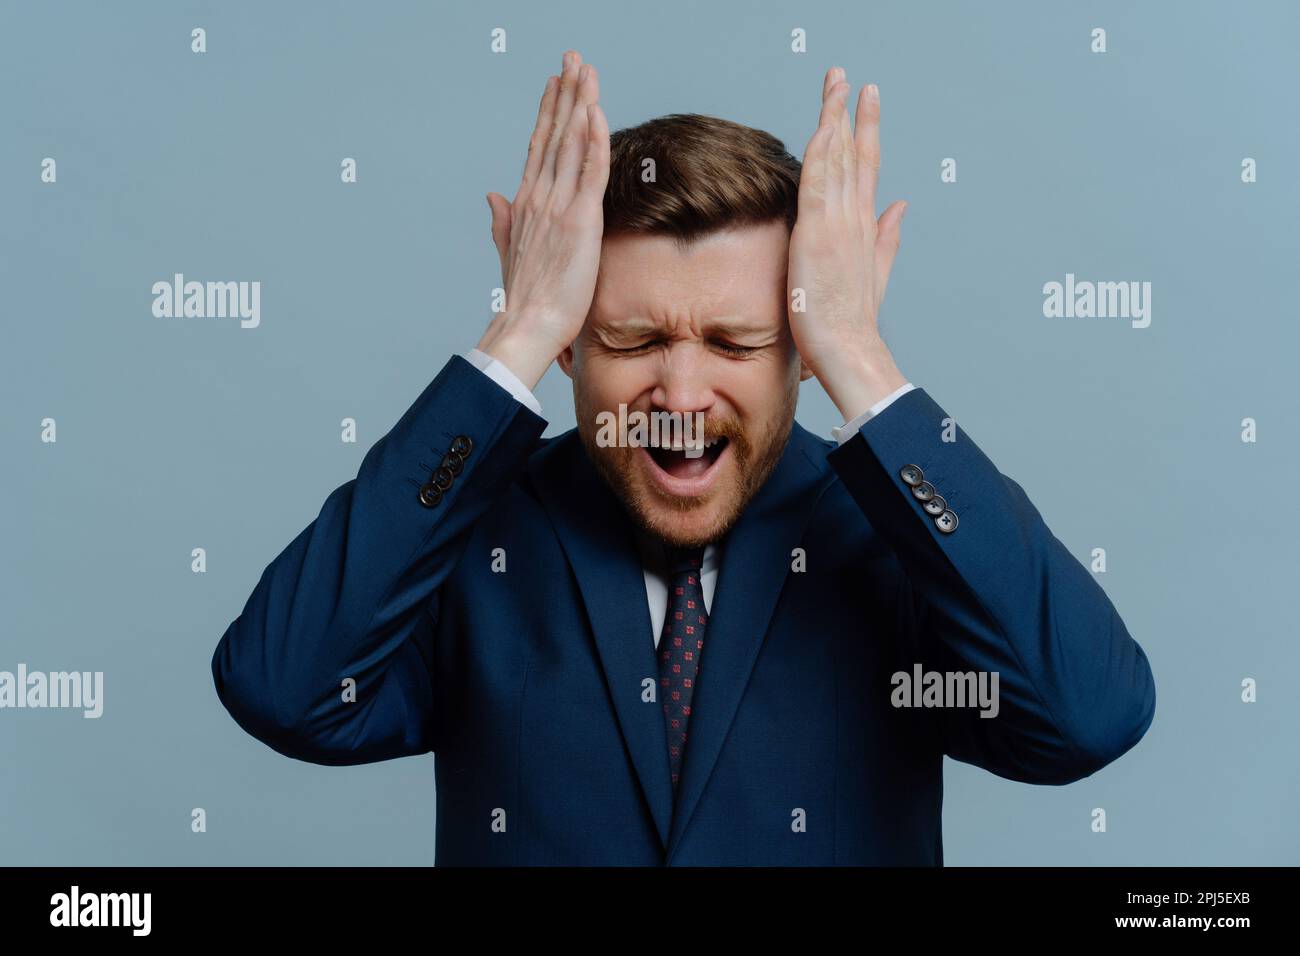 Business failure. Unhappy frustrated businessman or male entrepreneur wearing suit keeping head in hands and screaming loudly from receiving bad negat Stock Photo